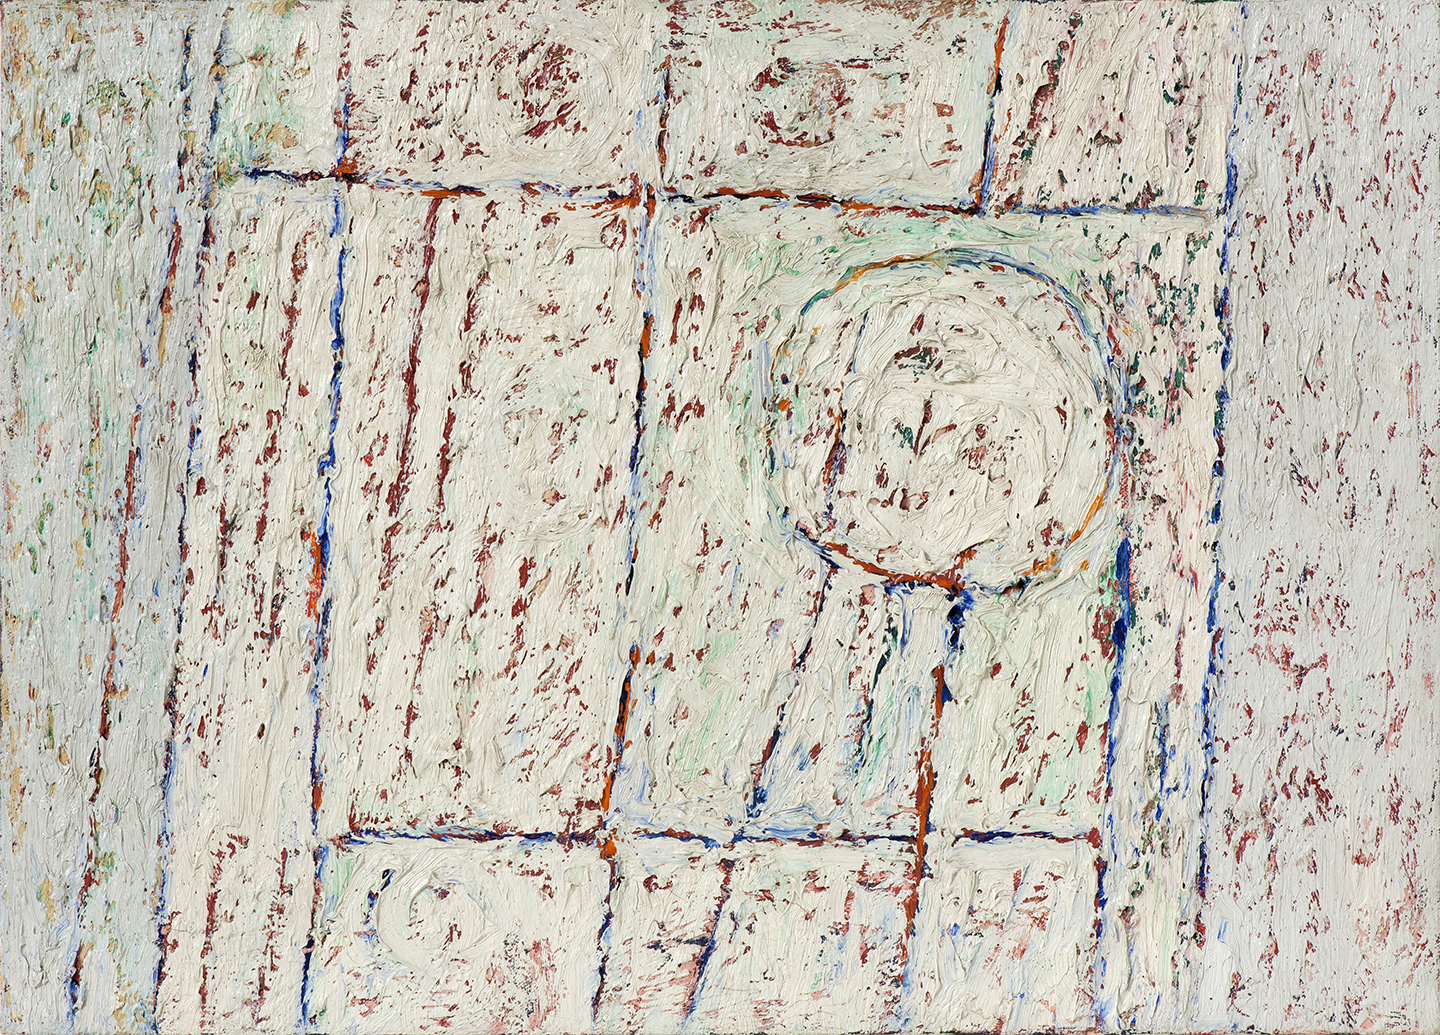 White Painting, 1965
oil on canvas
15 x 21 inches